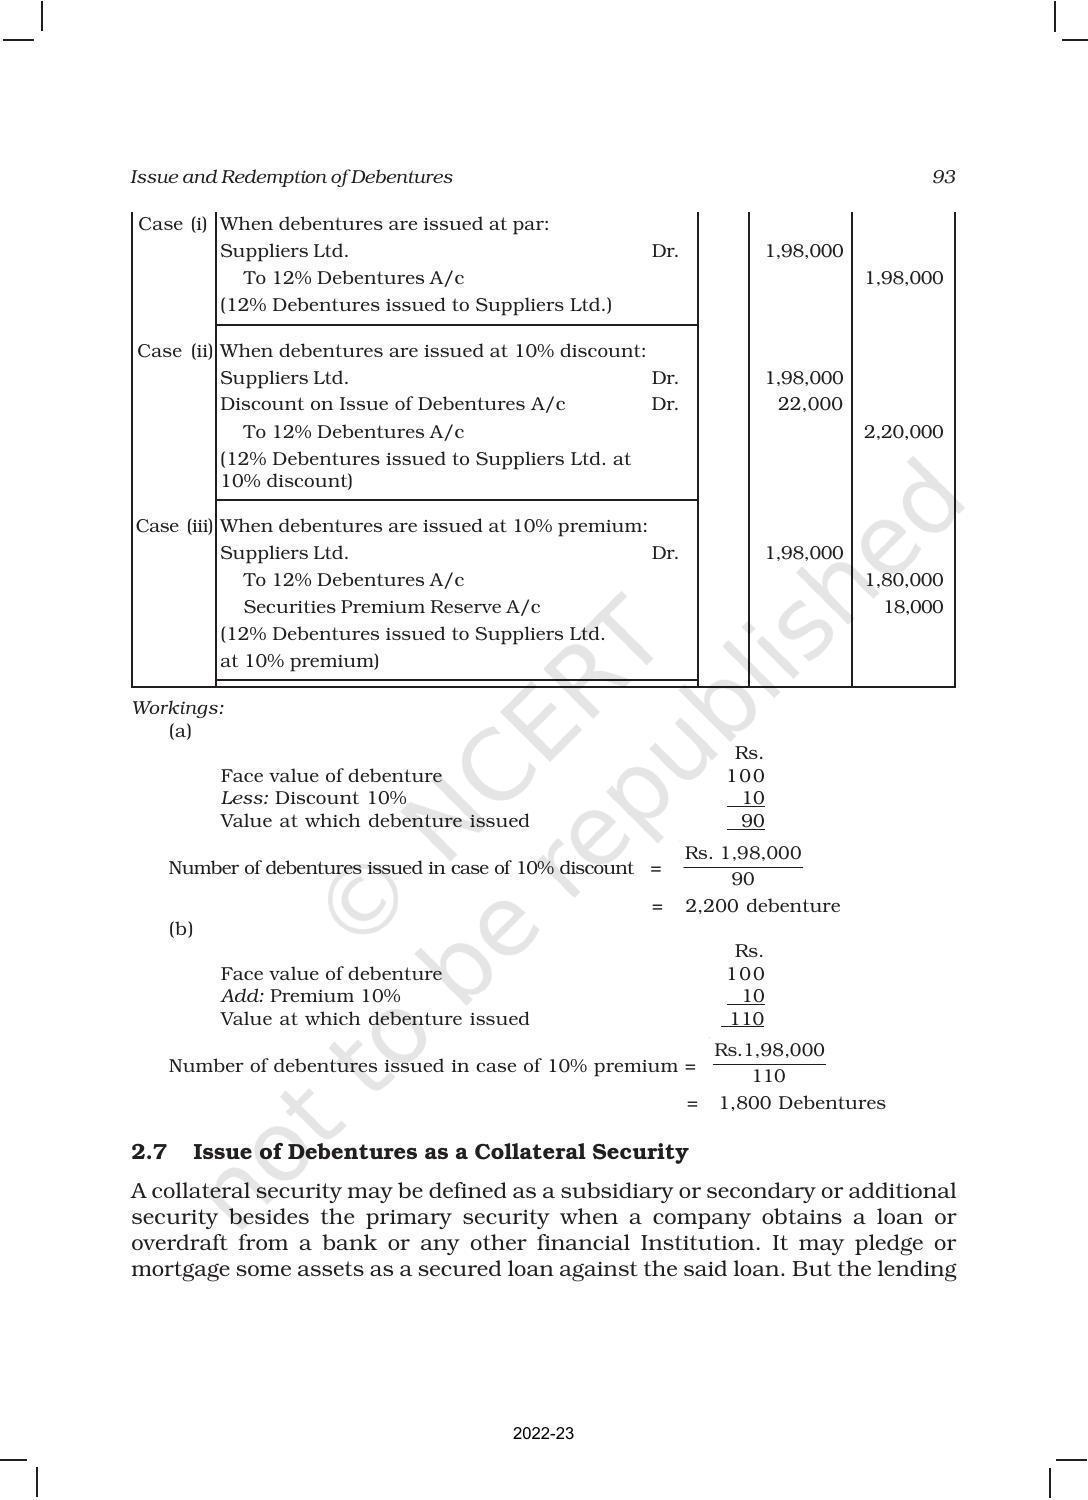 NCERT Book for Class 12 Accountancy Part II Chapter 1 Issue and Redemption of Debentures - Page 19